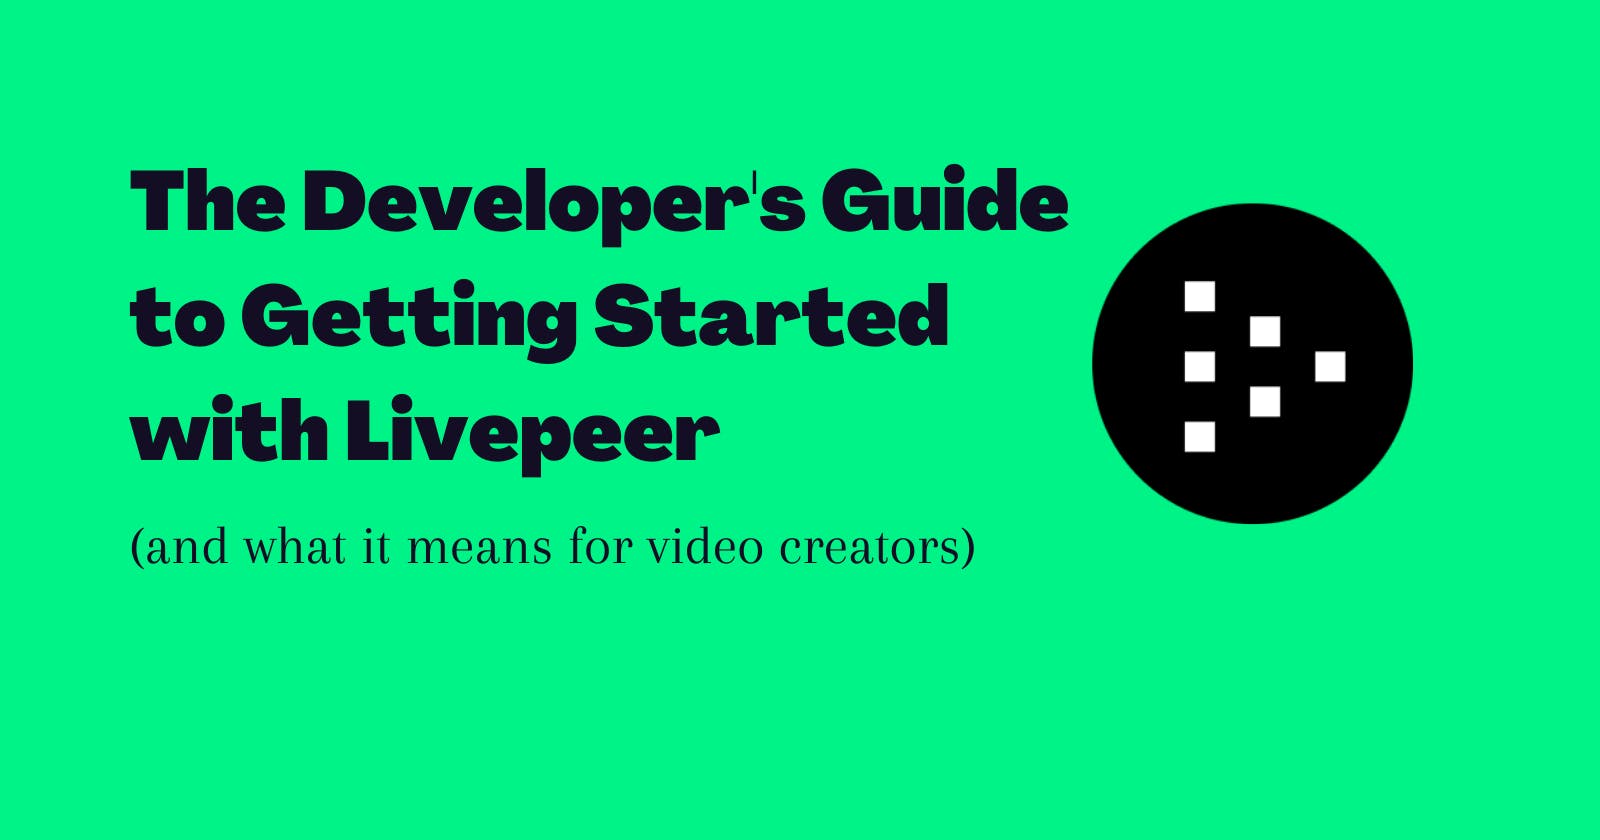 The Developer's Guide to Getting Started with Livepeer